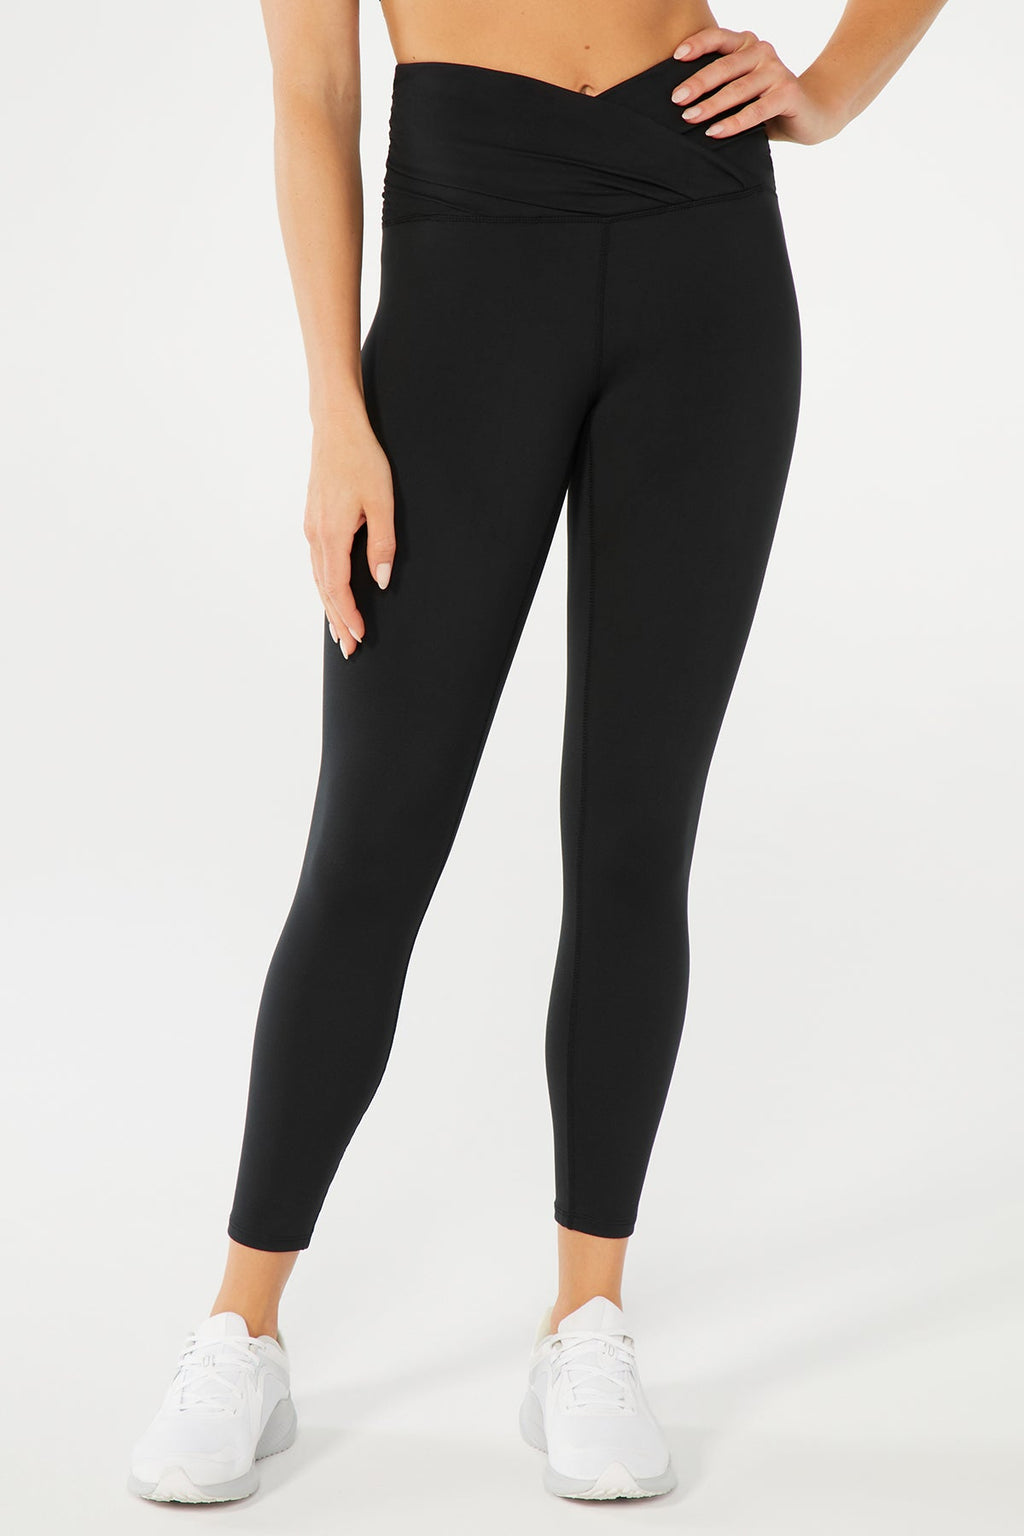 NEW Z by Zobha Women's Shine High Waisted Leggings Size Small $89 Retail